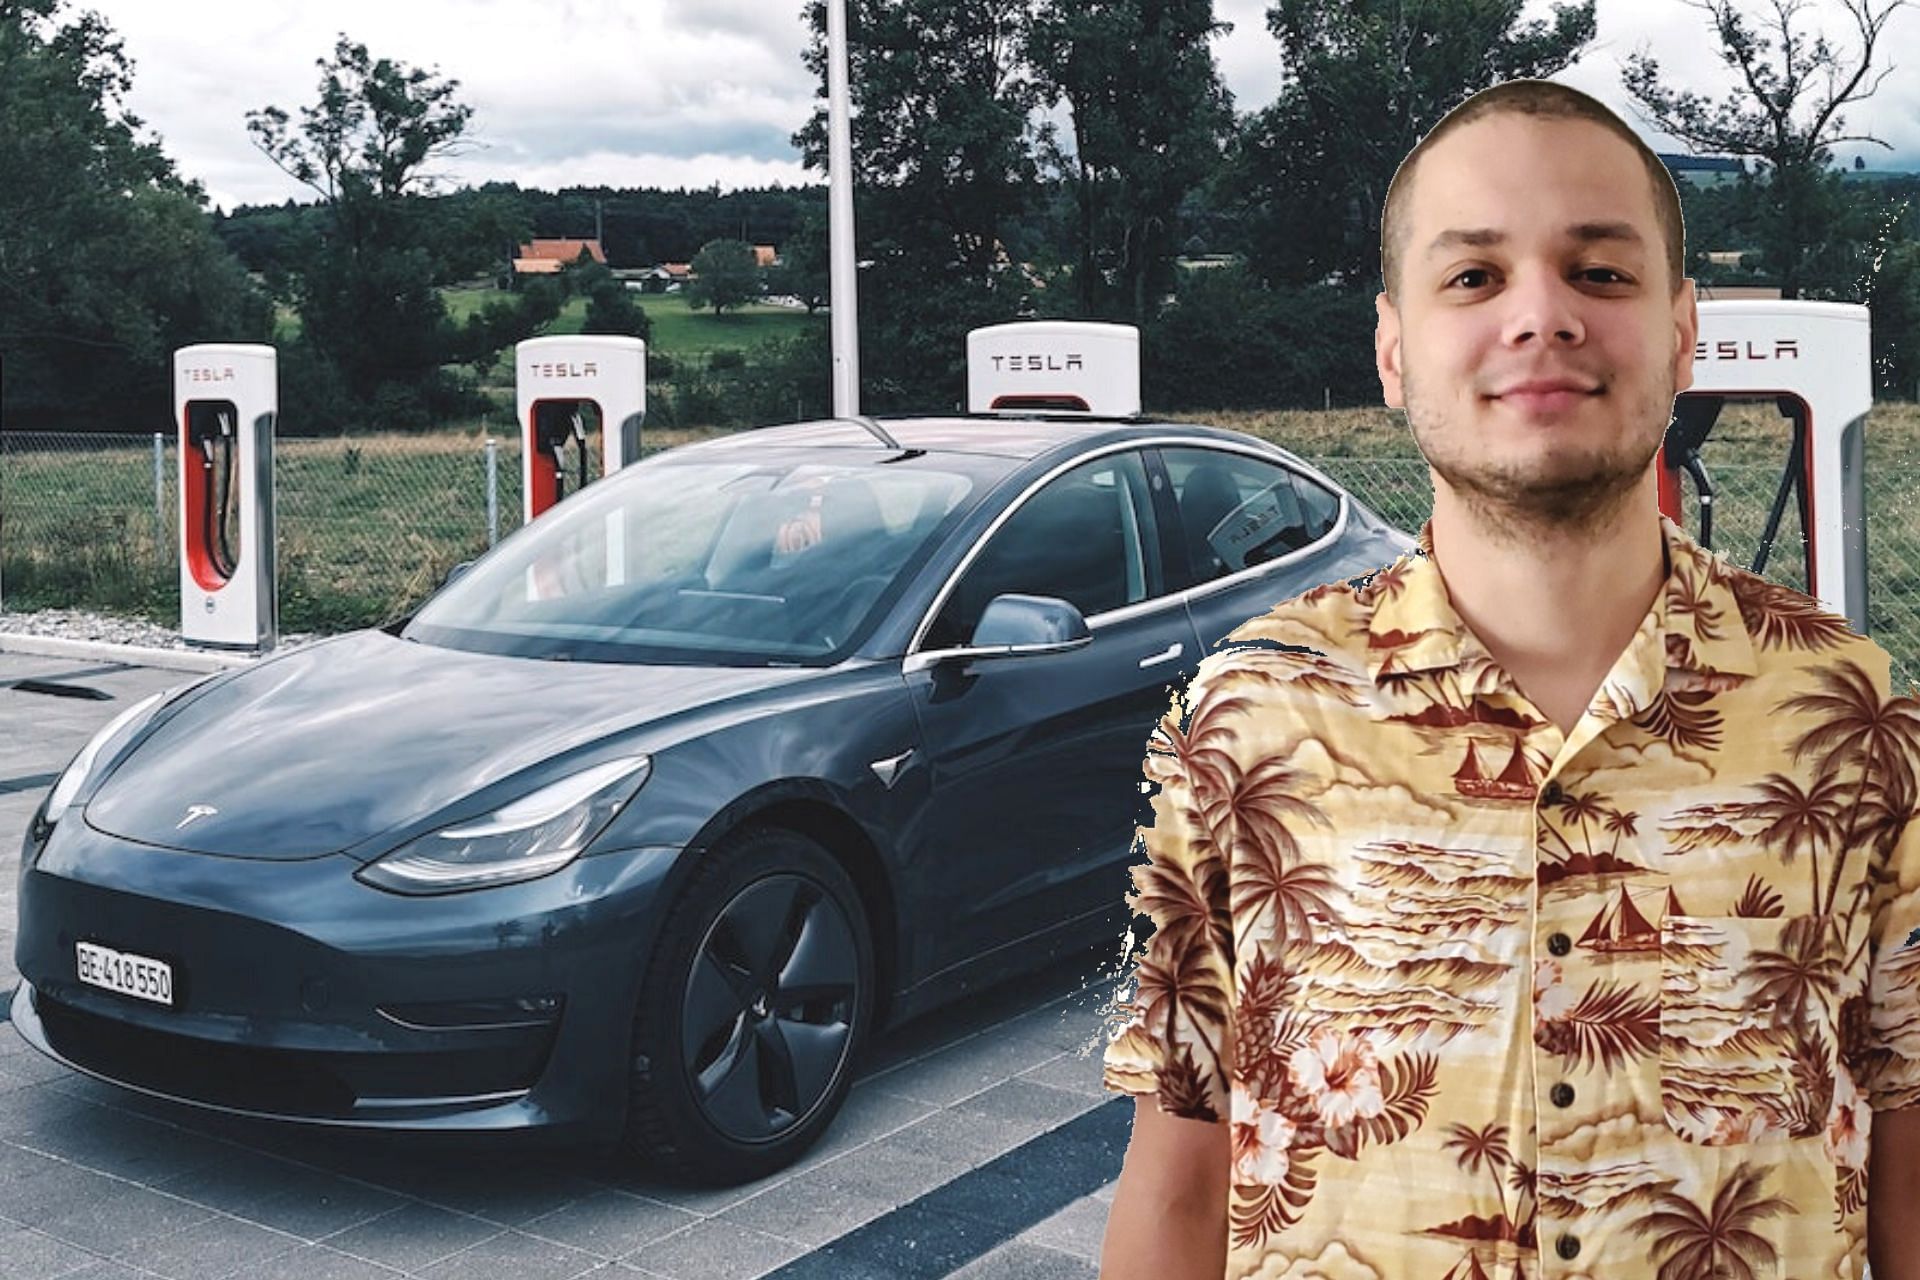 Fans troll Erobb221 after he reveals that he pays $9 per month for internet services in his car (Image via Sportskeeda)